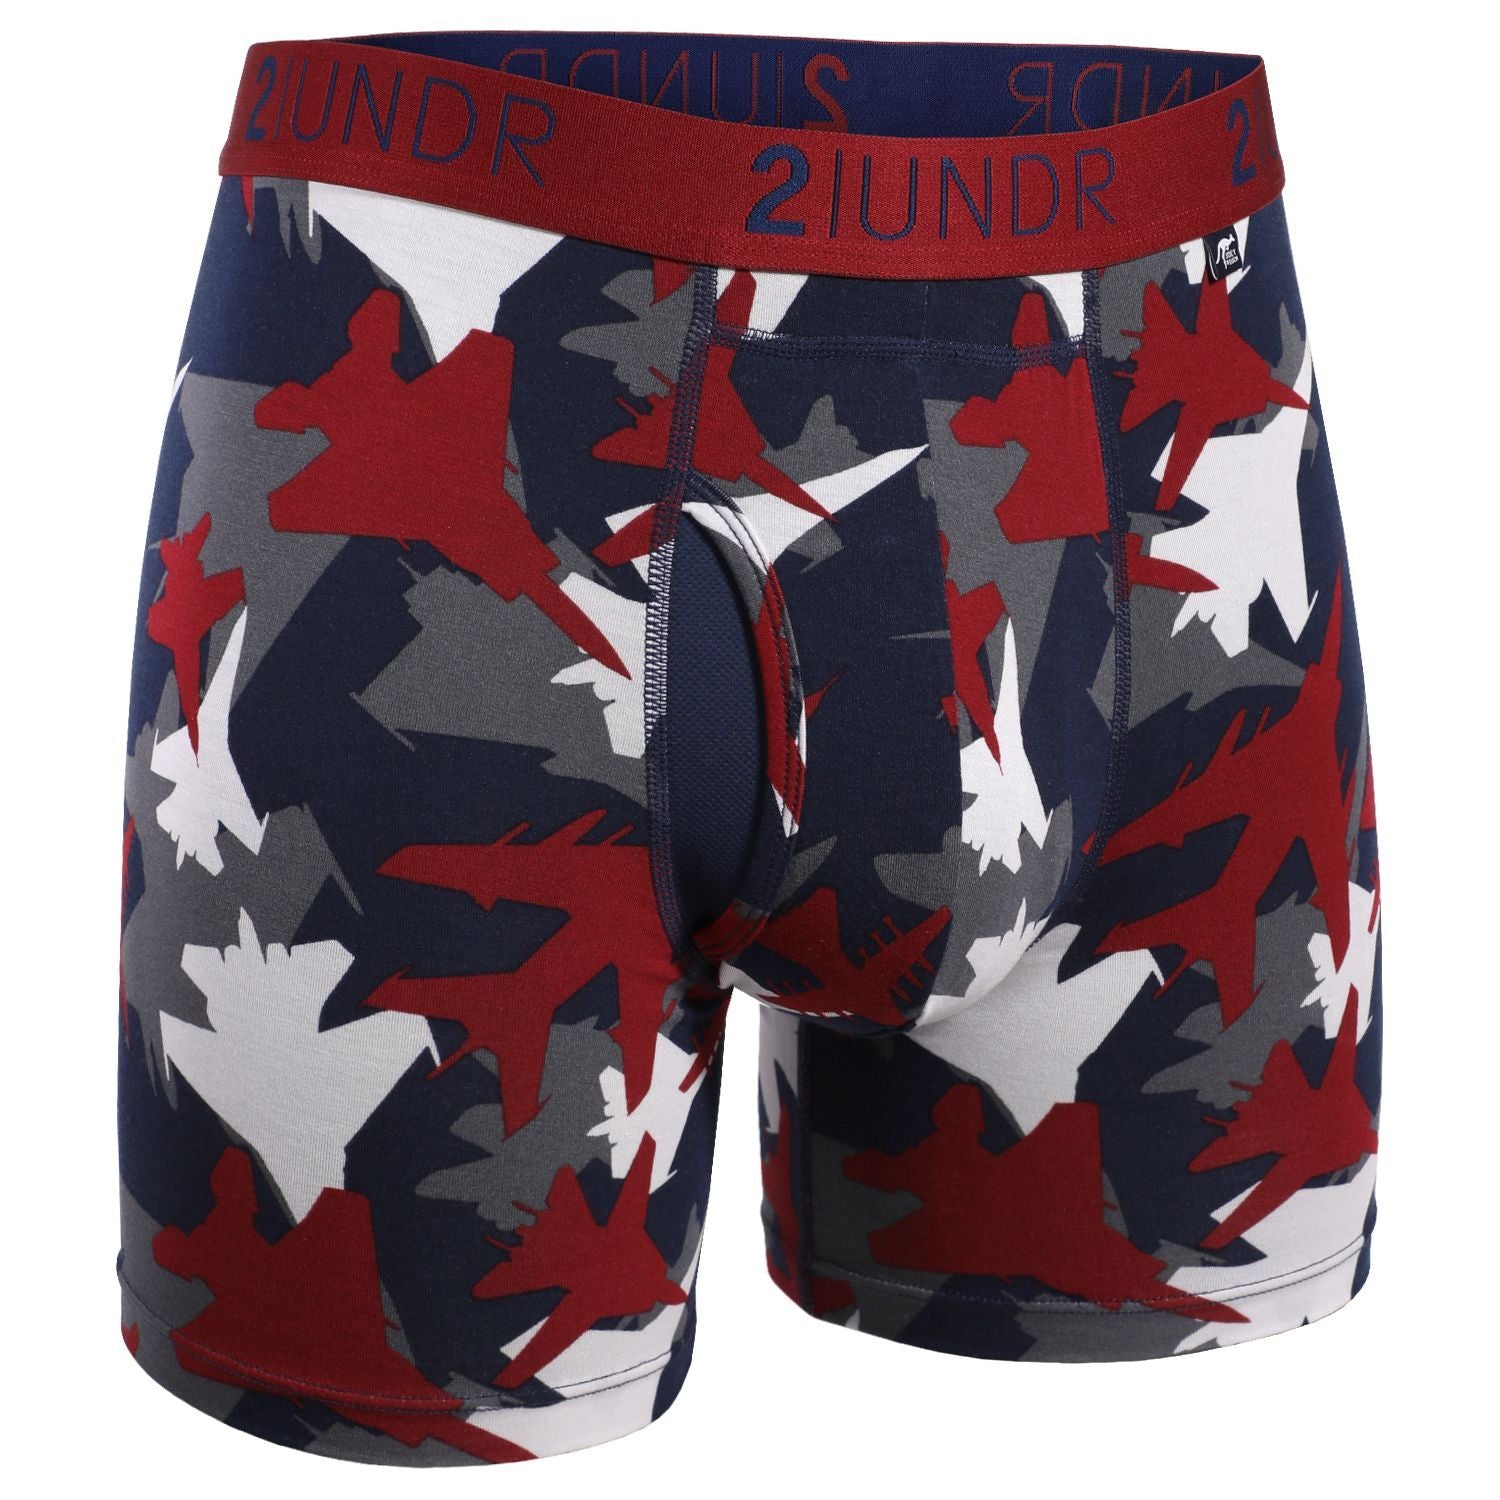 https://allthingsbeingeco.ca/cdn/shop/products/2UNDR-Swig-Shift-Boxer-Brief-Top-Gun-Allthings-Being-Eco-Chilliwack.jpg?v=1663785109